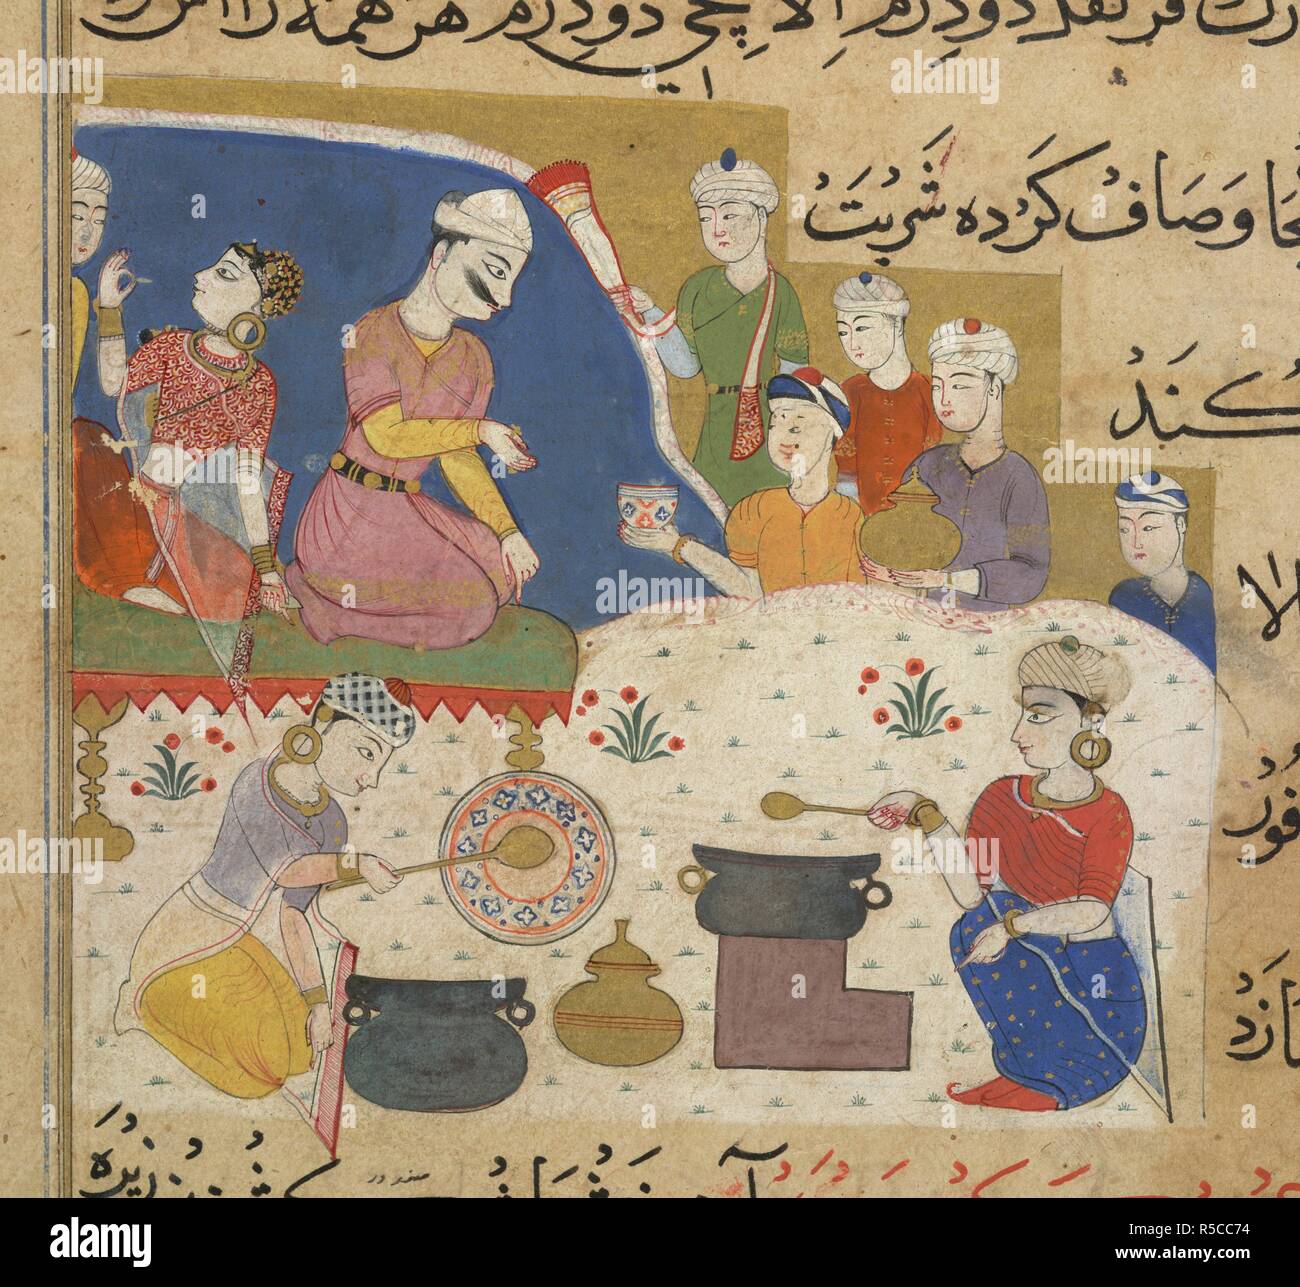 Preparation of soft food. The Ni'matnama-i Nasir al-Din Shah. A manuscript o. 1495 - 1505. Preparation of soft food and sherbet for the Sultan Ghiyathal-Din. Opaque watercolour. Sultanate style.  Image taken from The Ni'matnama-i Nasir al-Din Shah. A manuscript on Indian cookery and the preparation of sweetmeats, spices etc.  Originally published/produced in 1495 - 1505. . Source: I.O. ISLAMIC 149, f.76. Language: Persian. Stock Photo